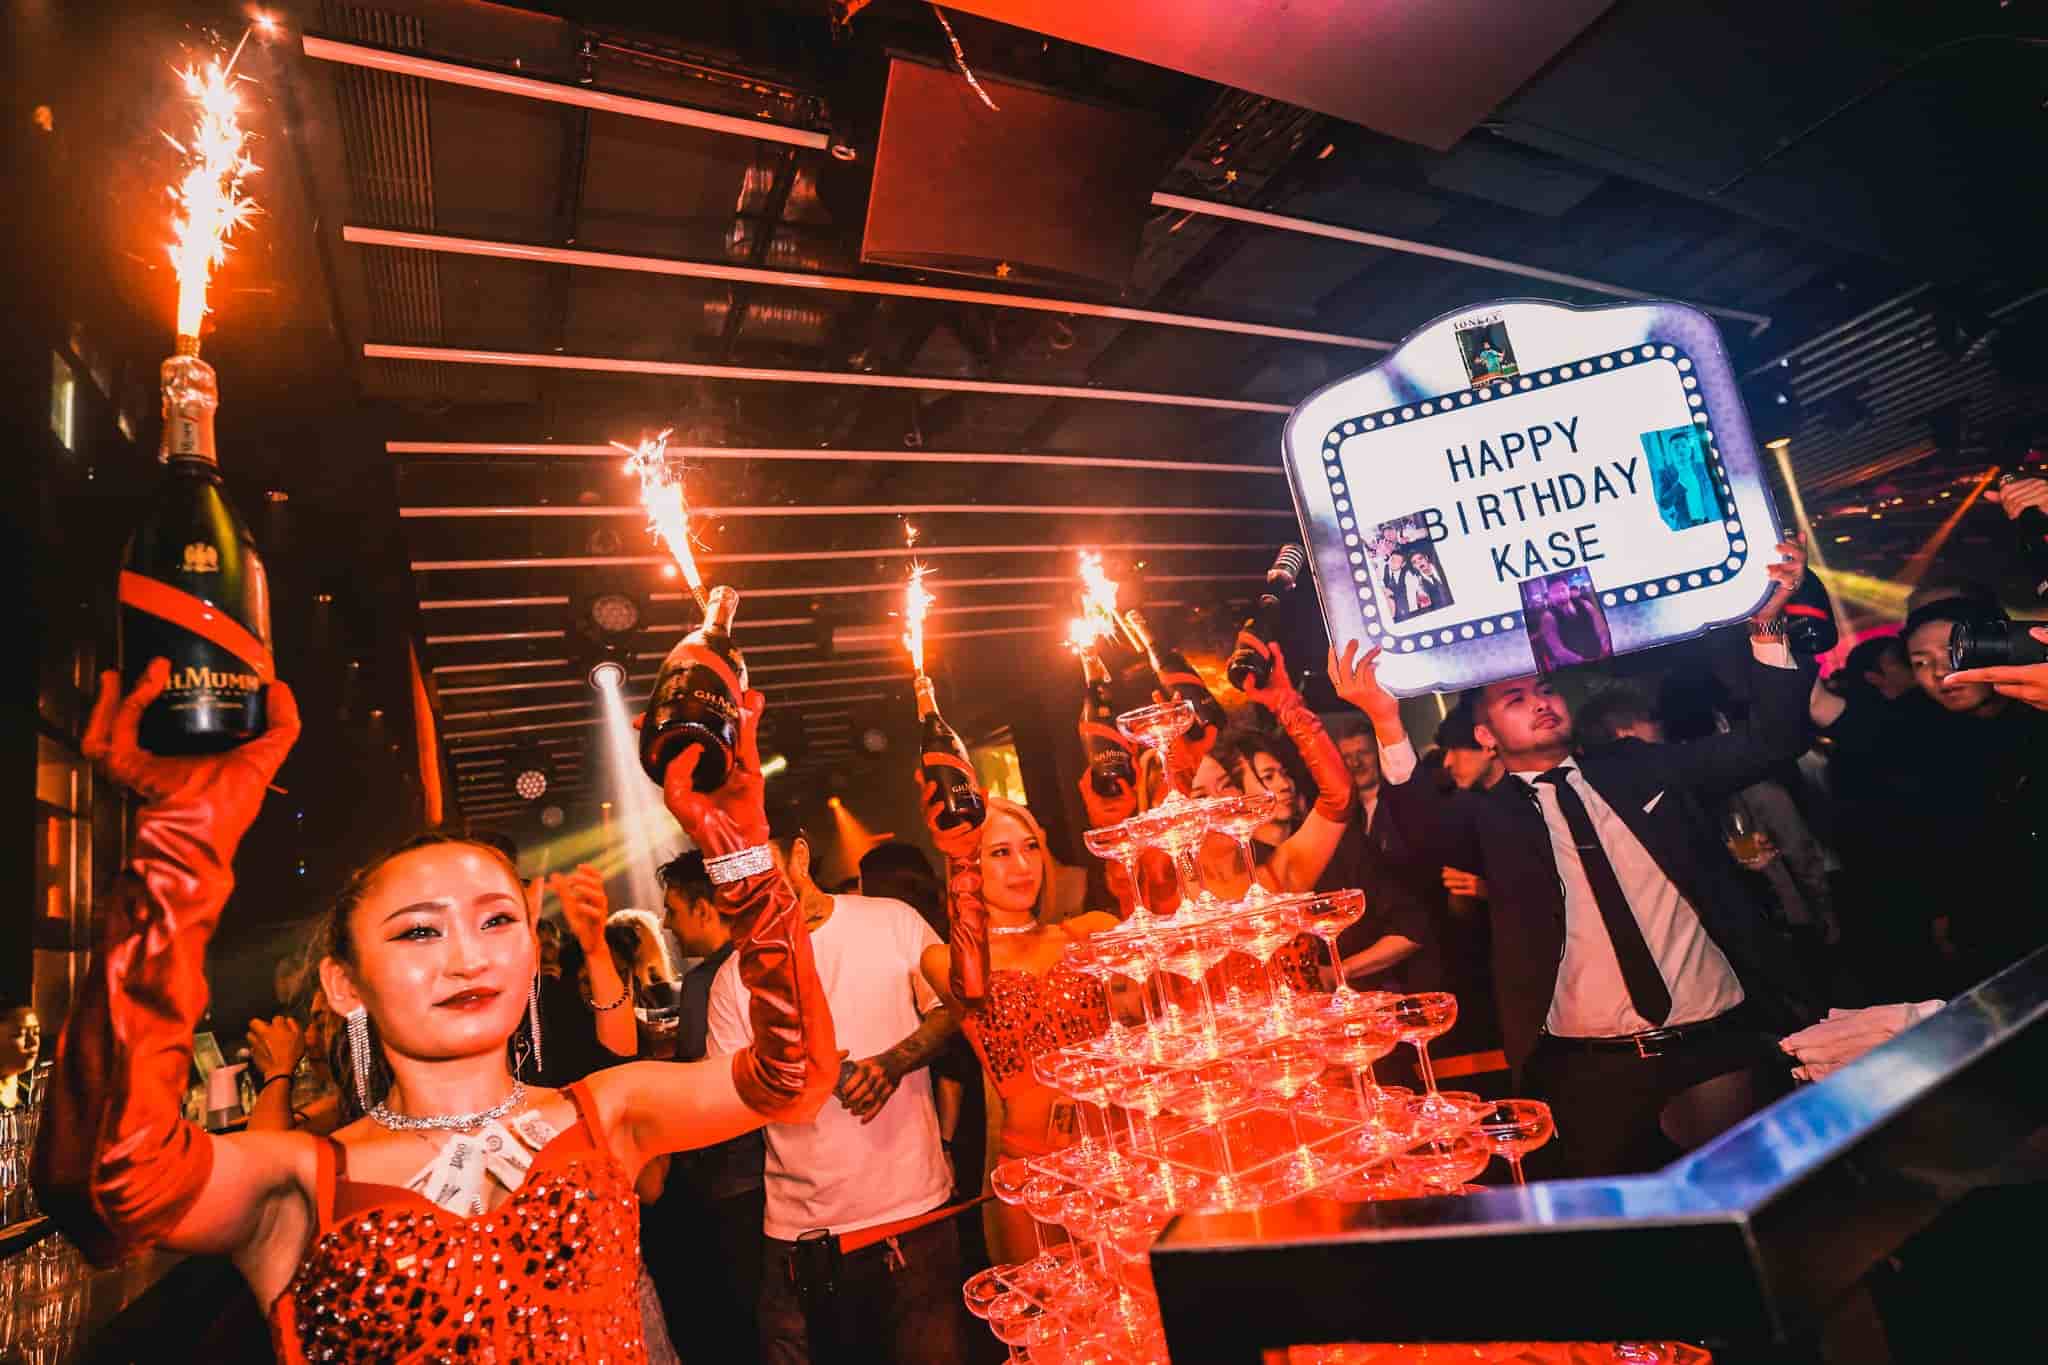 Bottle girls holding sparkling champagne with staff carrying a wish sign for a Shibuya Nightlife birthday bash in a crowded club.